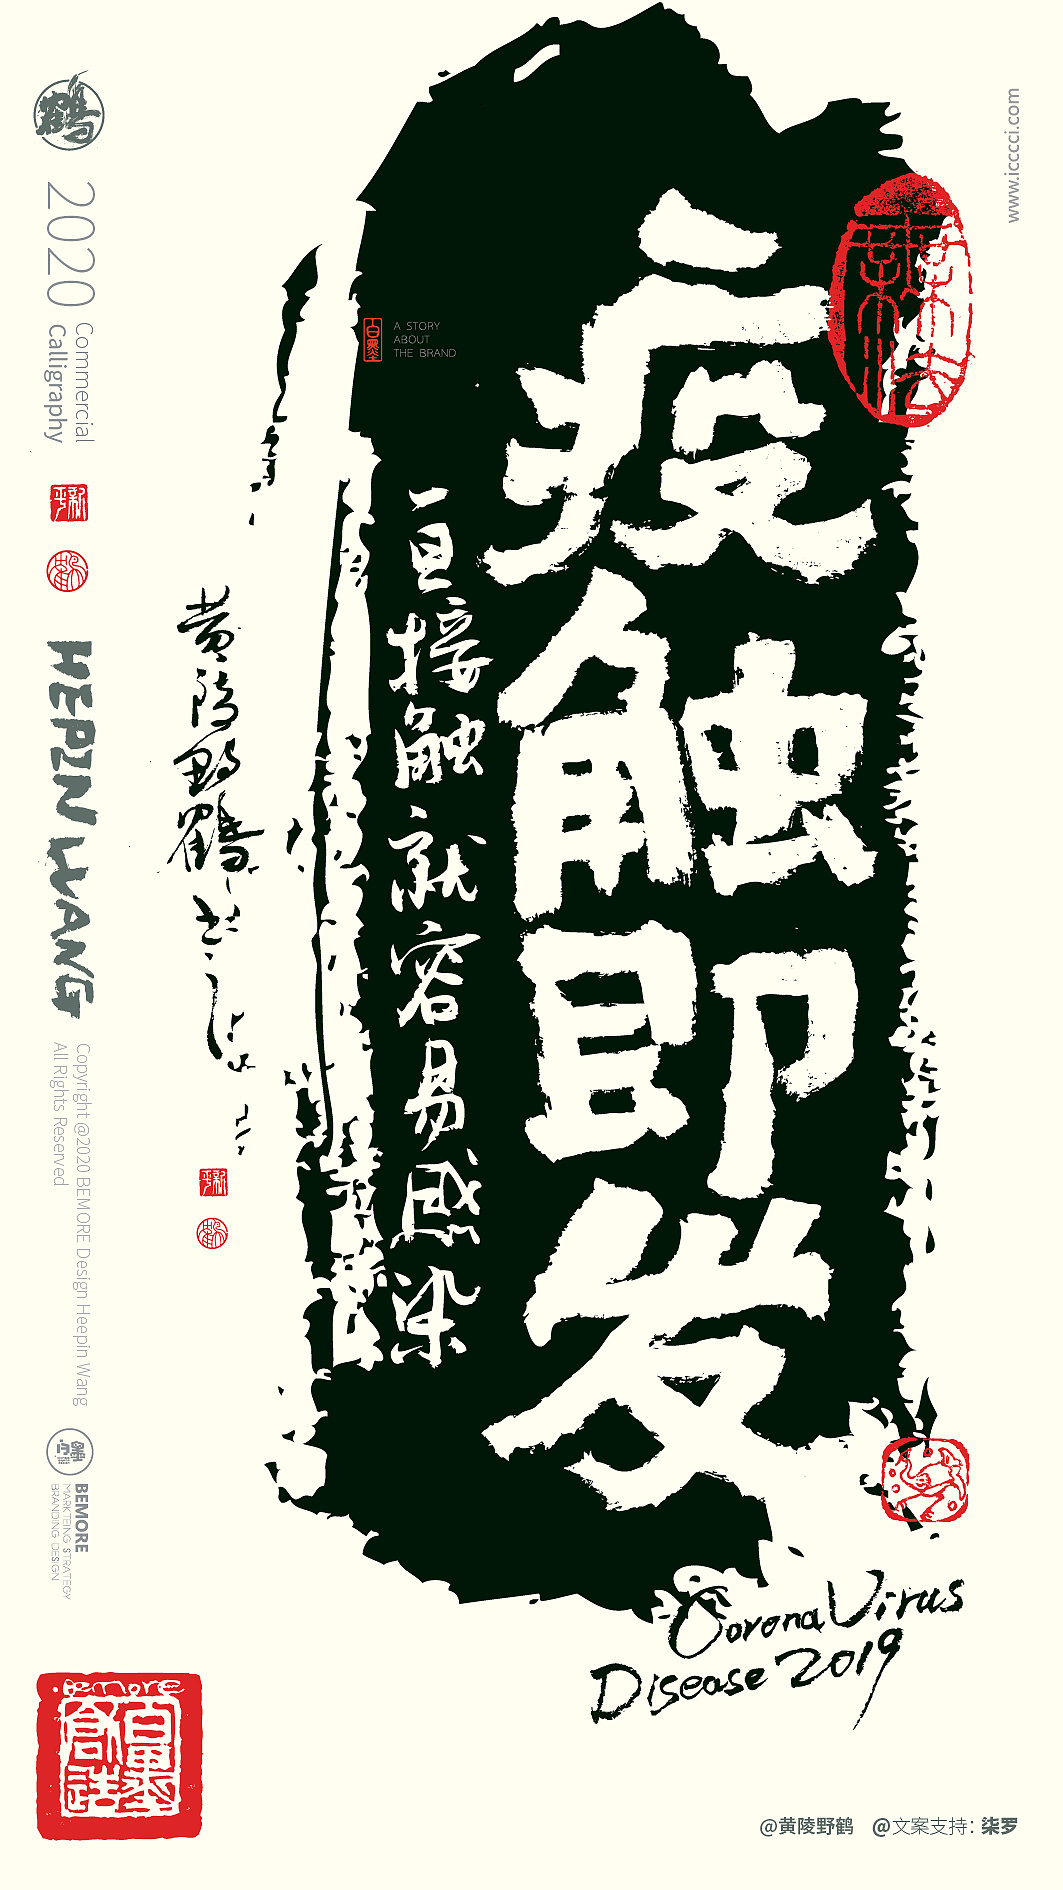 Chinese Creative Font Design-I am Huang Ling Ye He who is dedicated to the application of calligraphy as a commercial trend.